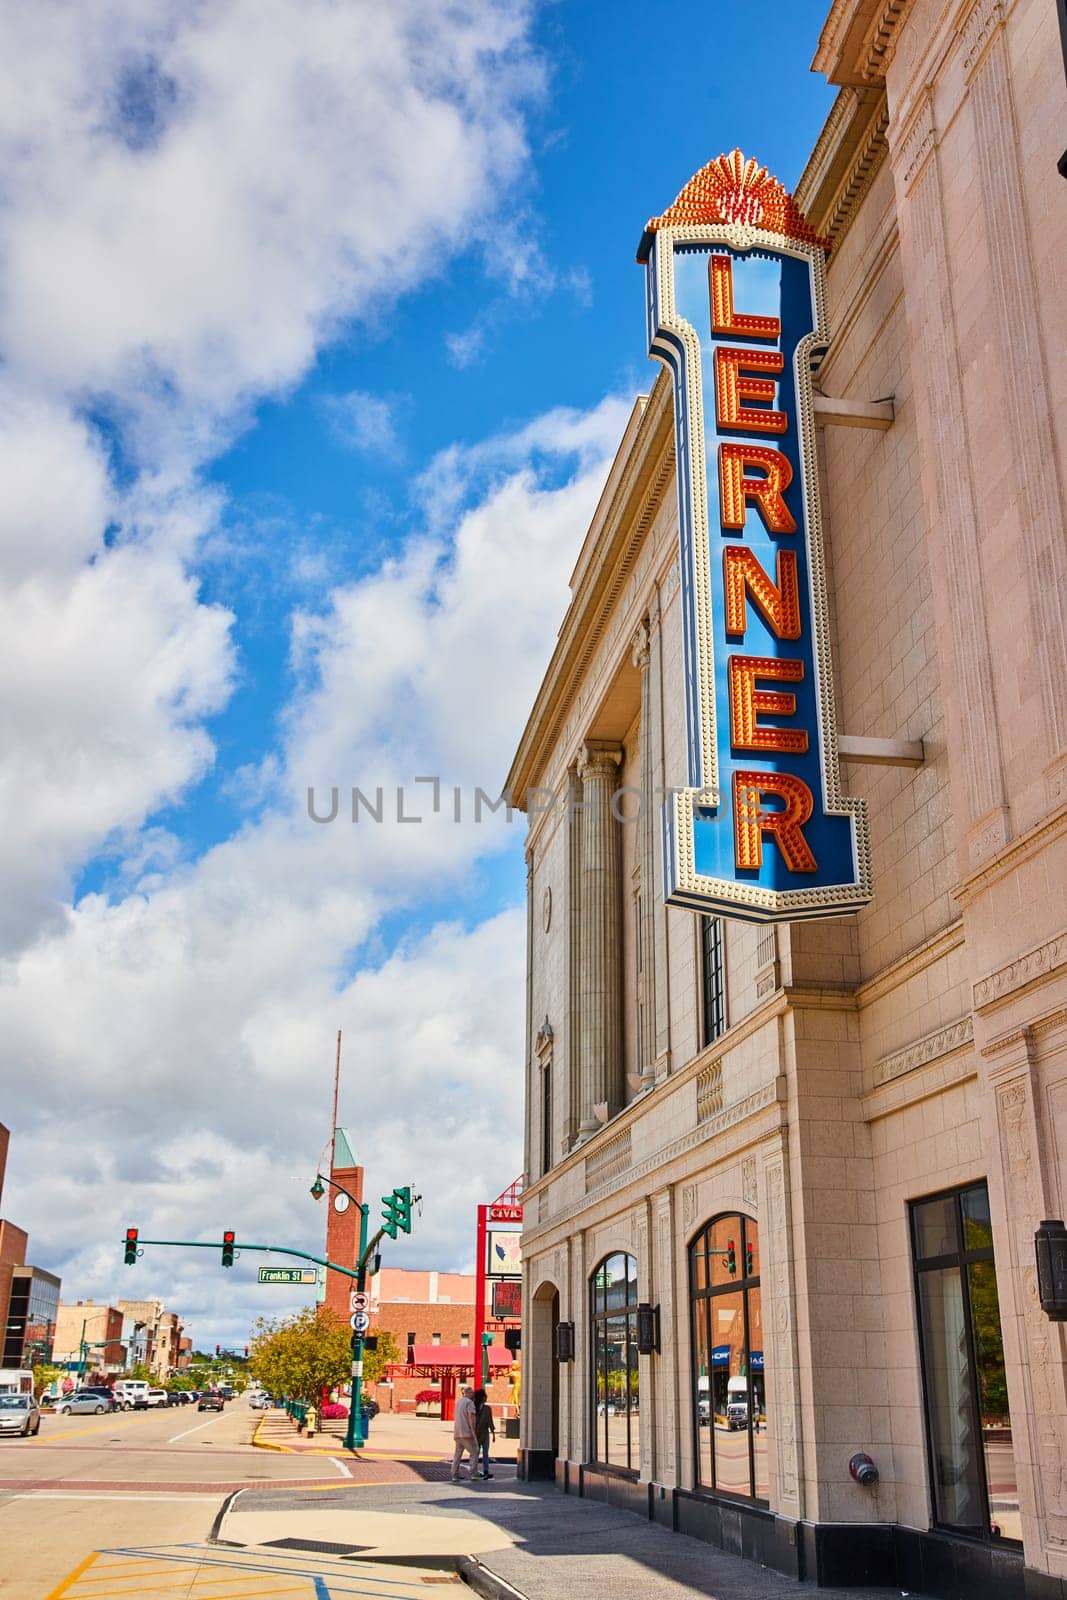 Lerner Theater Marquee and City Street Scene, Elkhart by njproductions